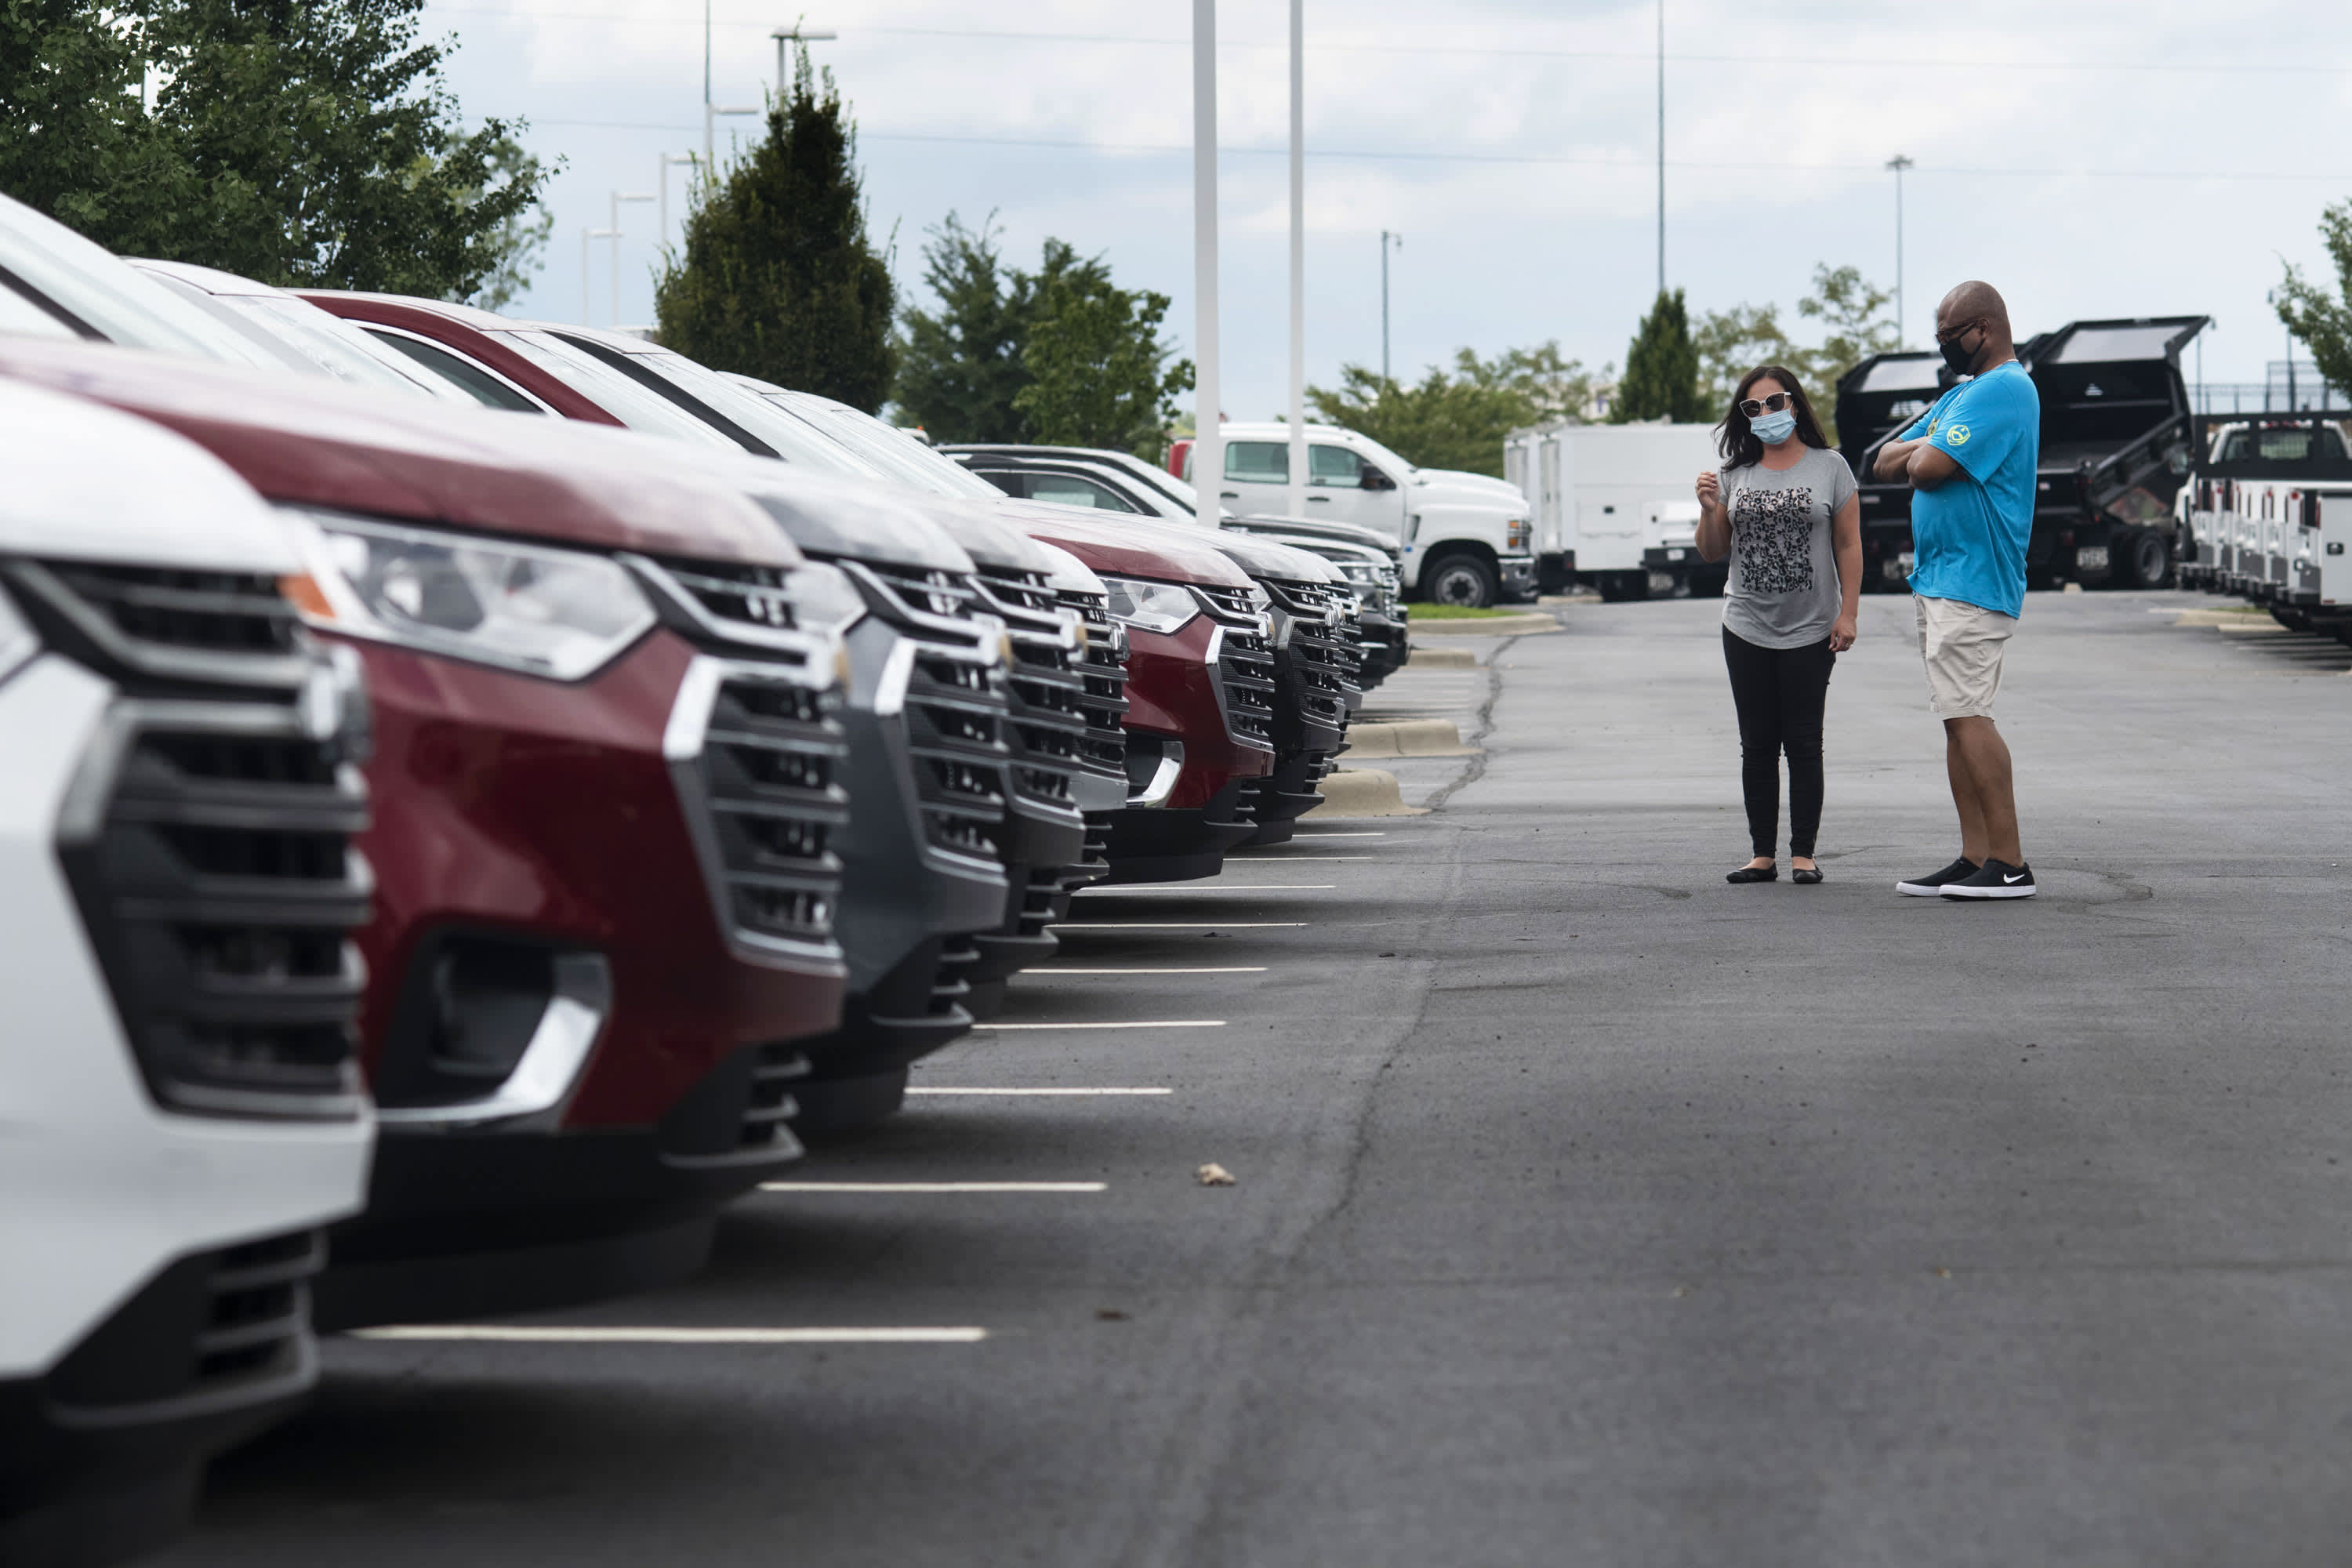 New or used car prices are on the rise as stocks fall this spring